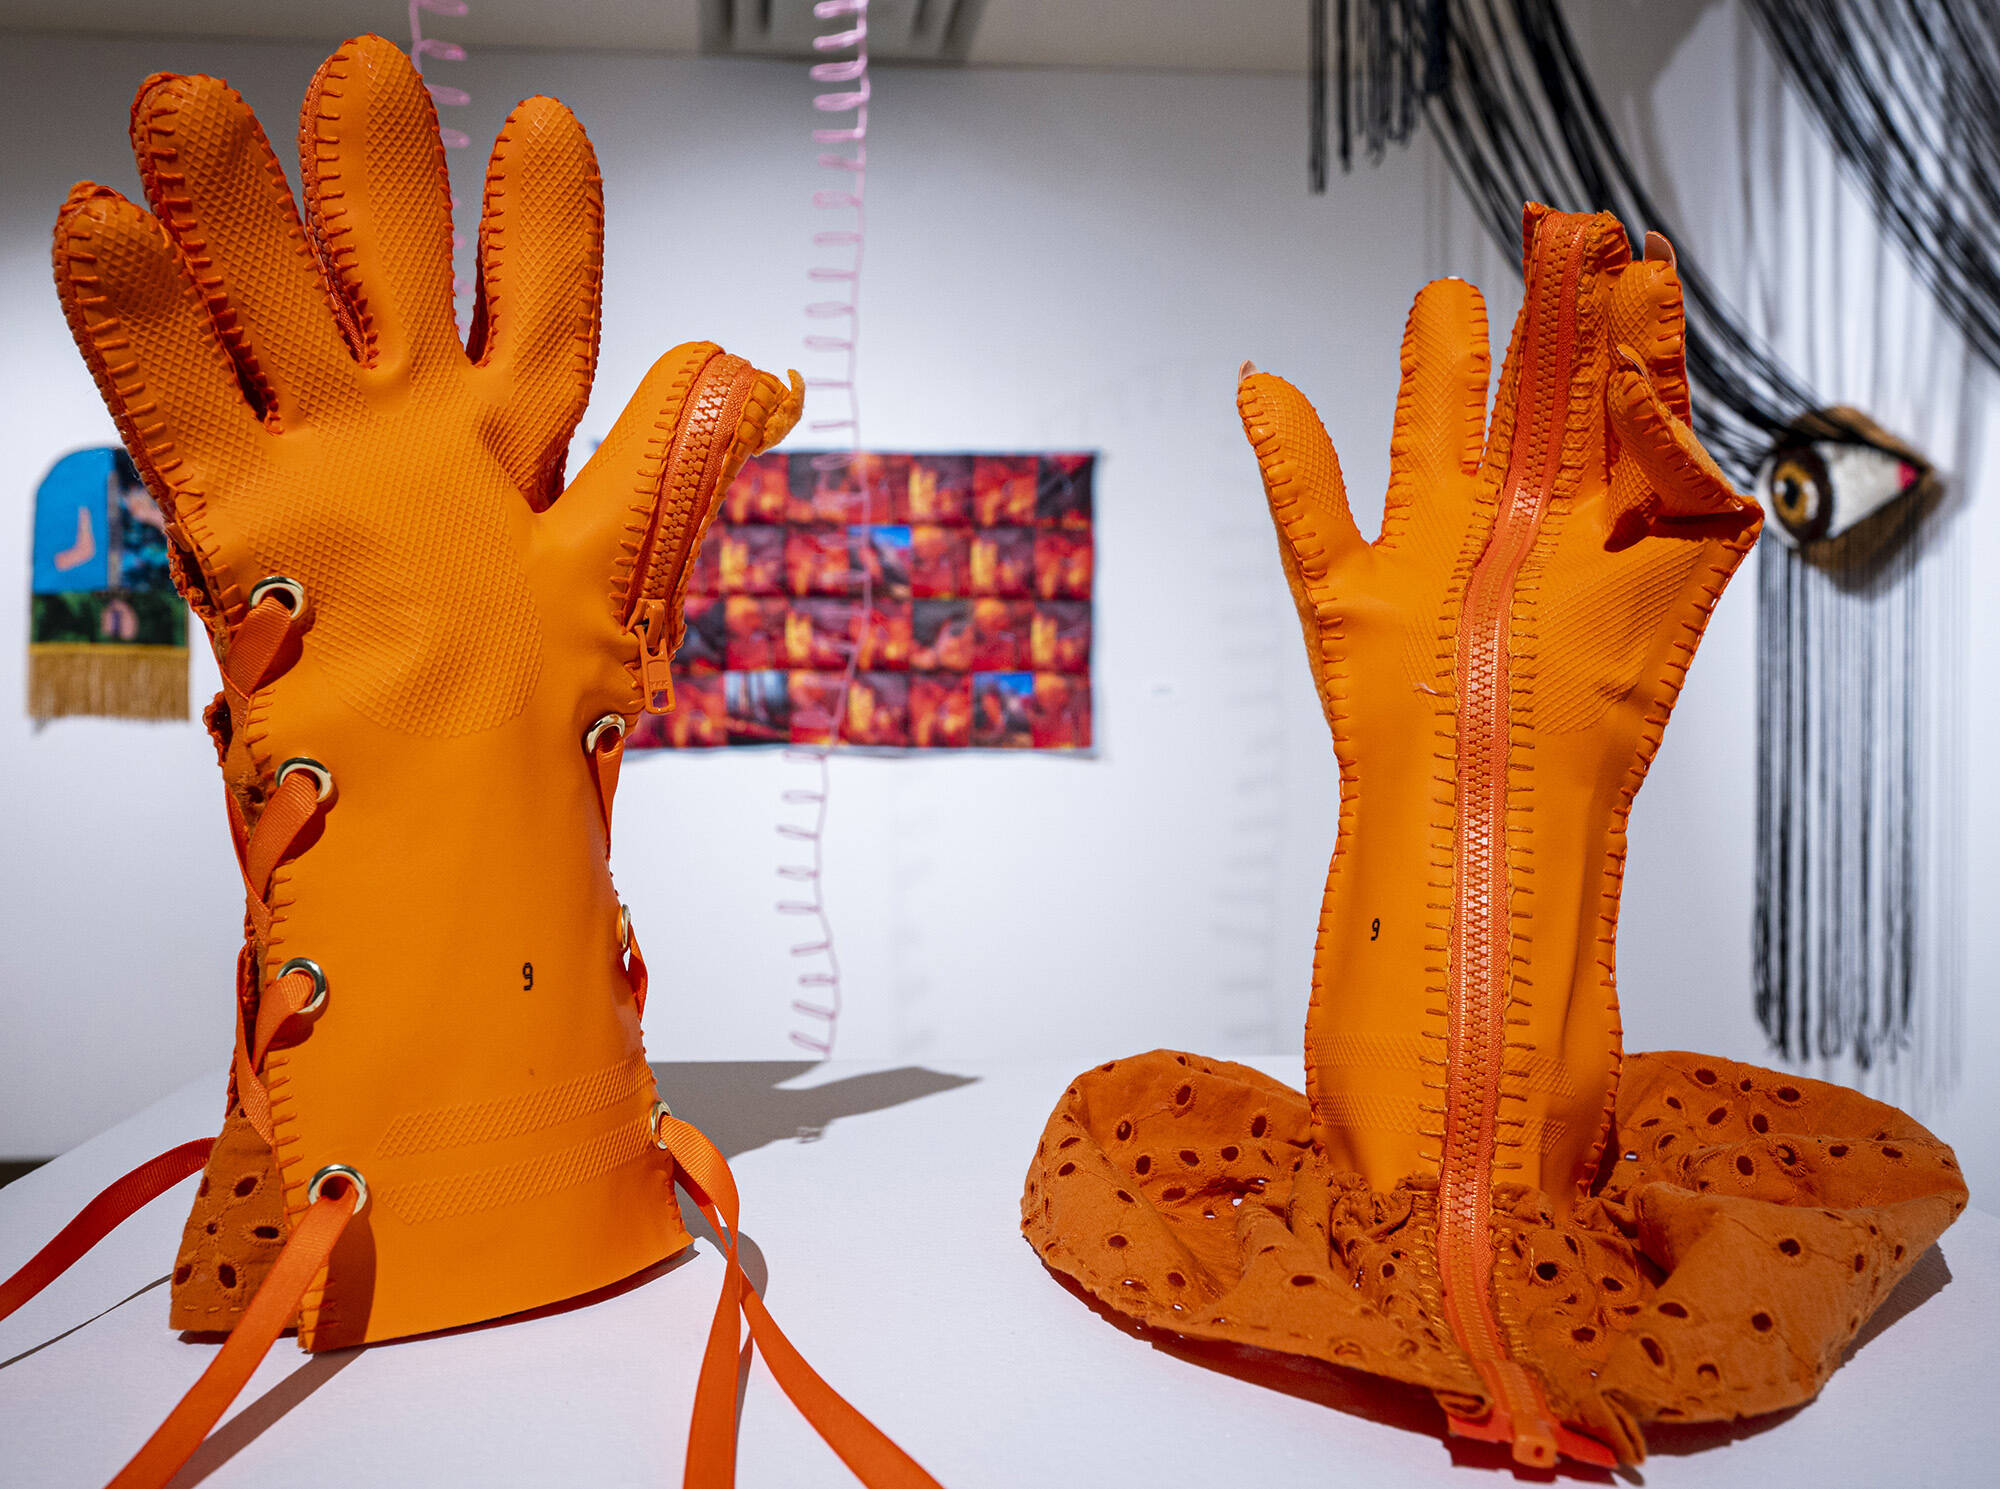 Orange Utility Gloves by Katie Newman is part of the Softcore exhibit by North Node Collective, featuring works by Courtney Holmes, Katie Newman, Heather Von Steinhagen and Manias. It is on display in the Yukon Energy Community Gallery at the Yukon Arts Centre until January 29. (Mike Thomas/Yukon Arts Centre)